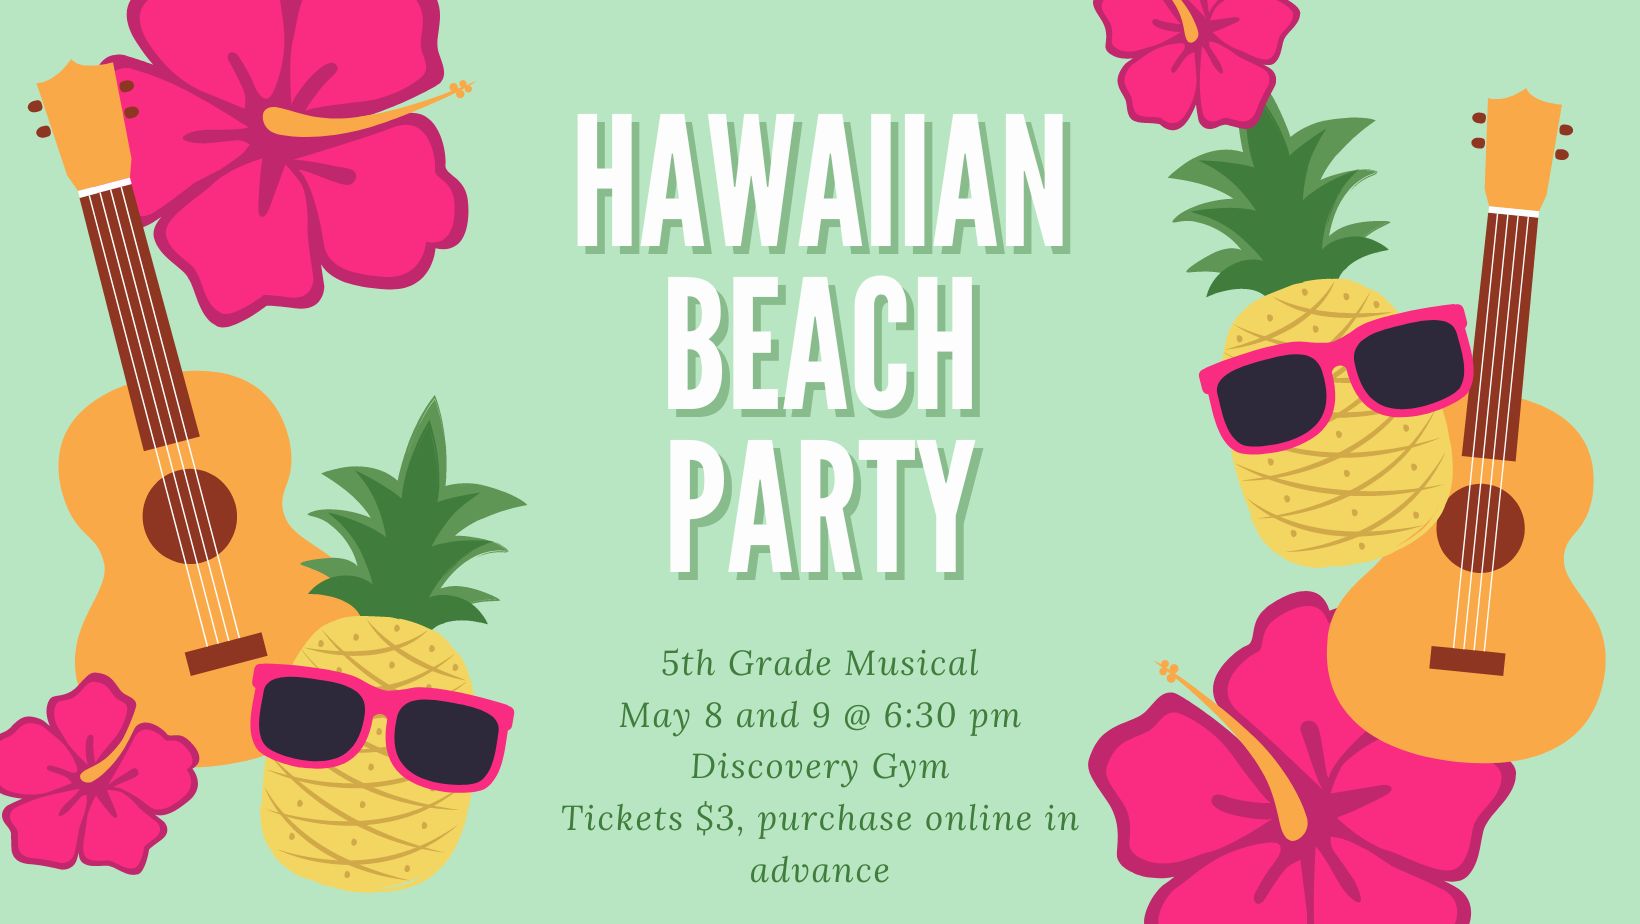 5th Grade Musical, Hawaiian Beach Party, May 8 and 9 at 6:30 pm in the Discovery Gym. Purchase tickets online in advance. Graphic shows tropical flowers, ukuleles, pineapples, and sunglasses.